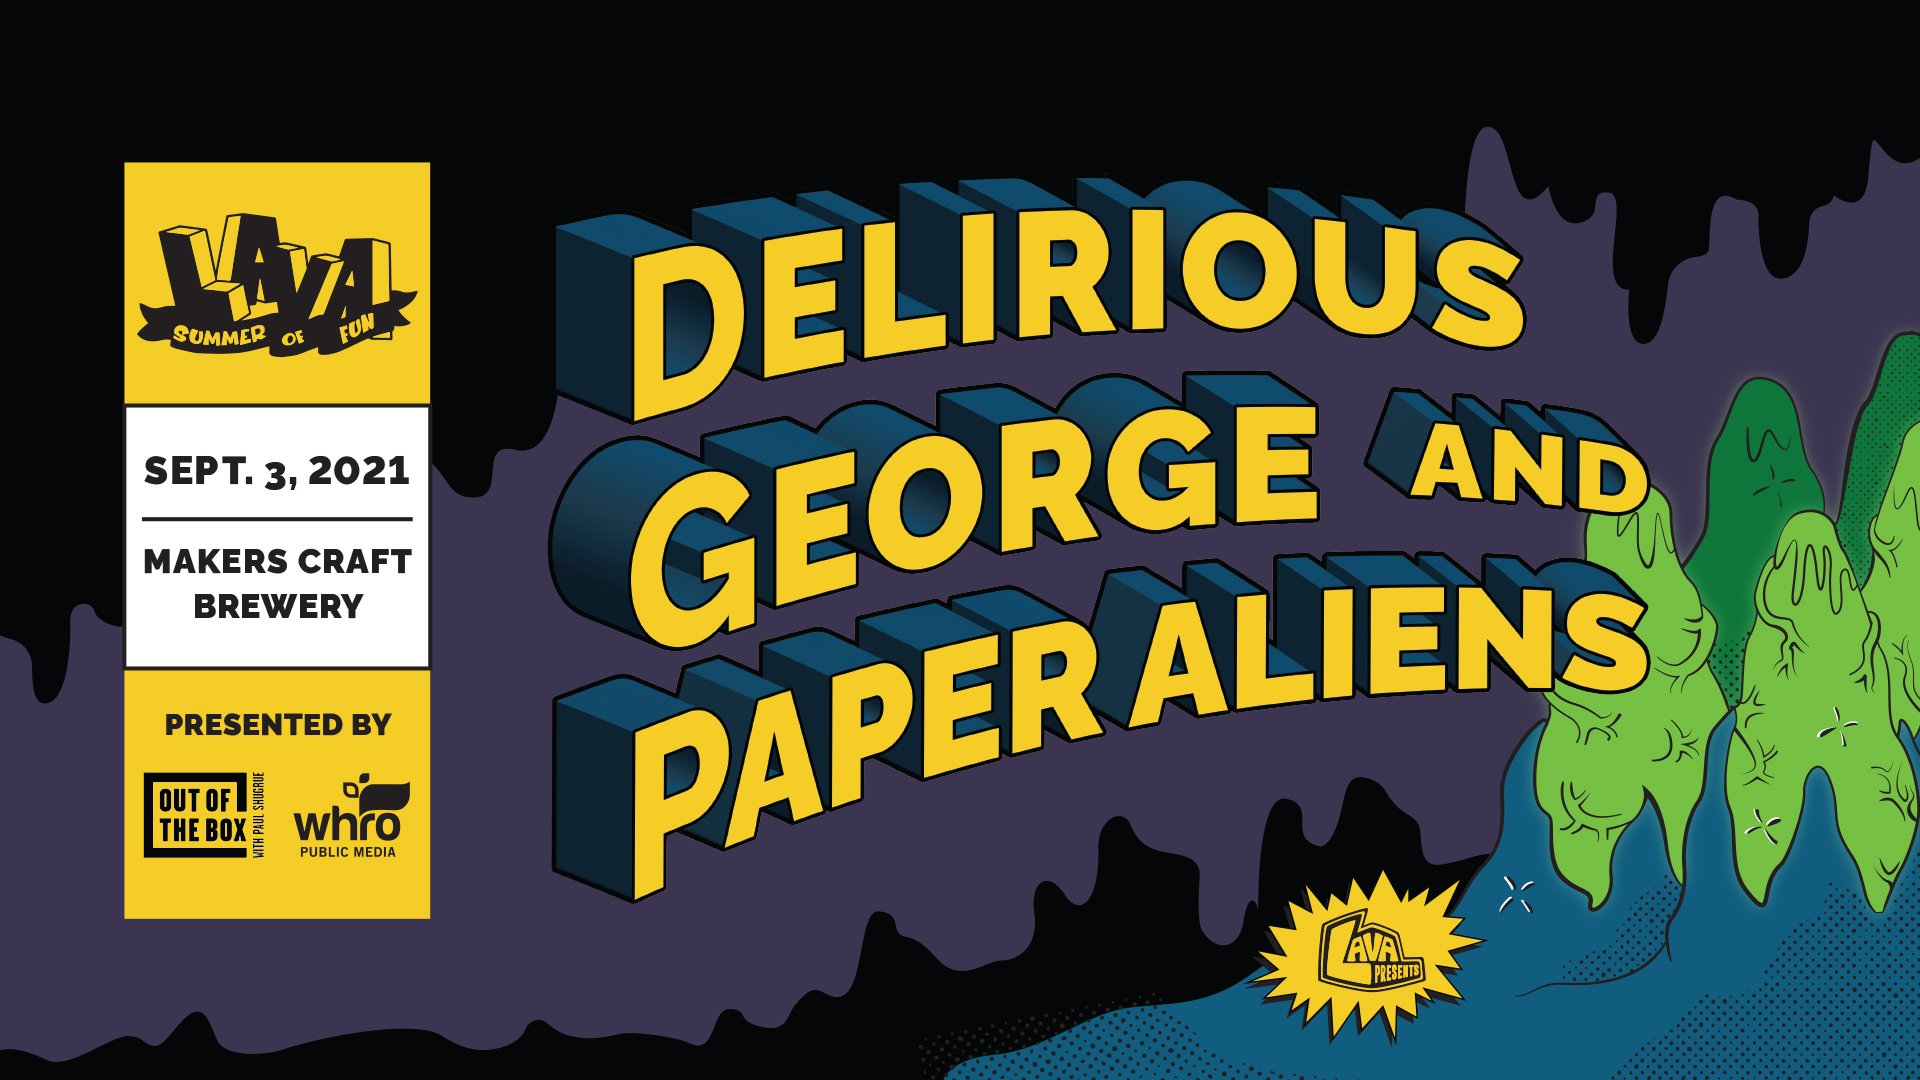 Delirious George and Paper Aliens